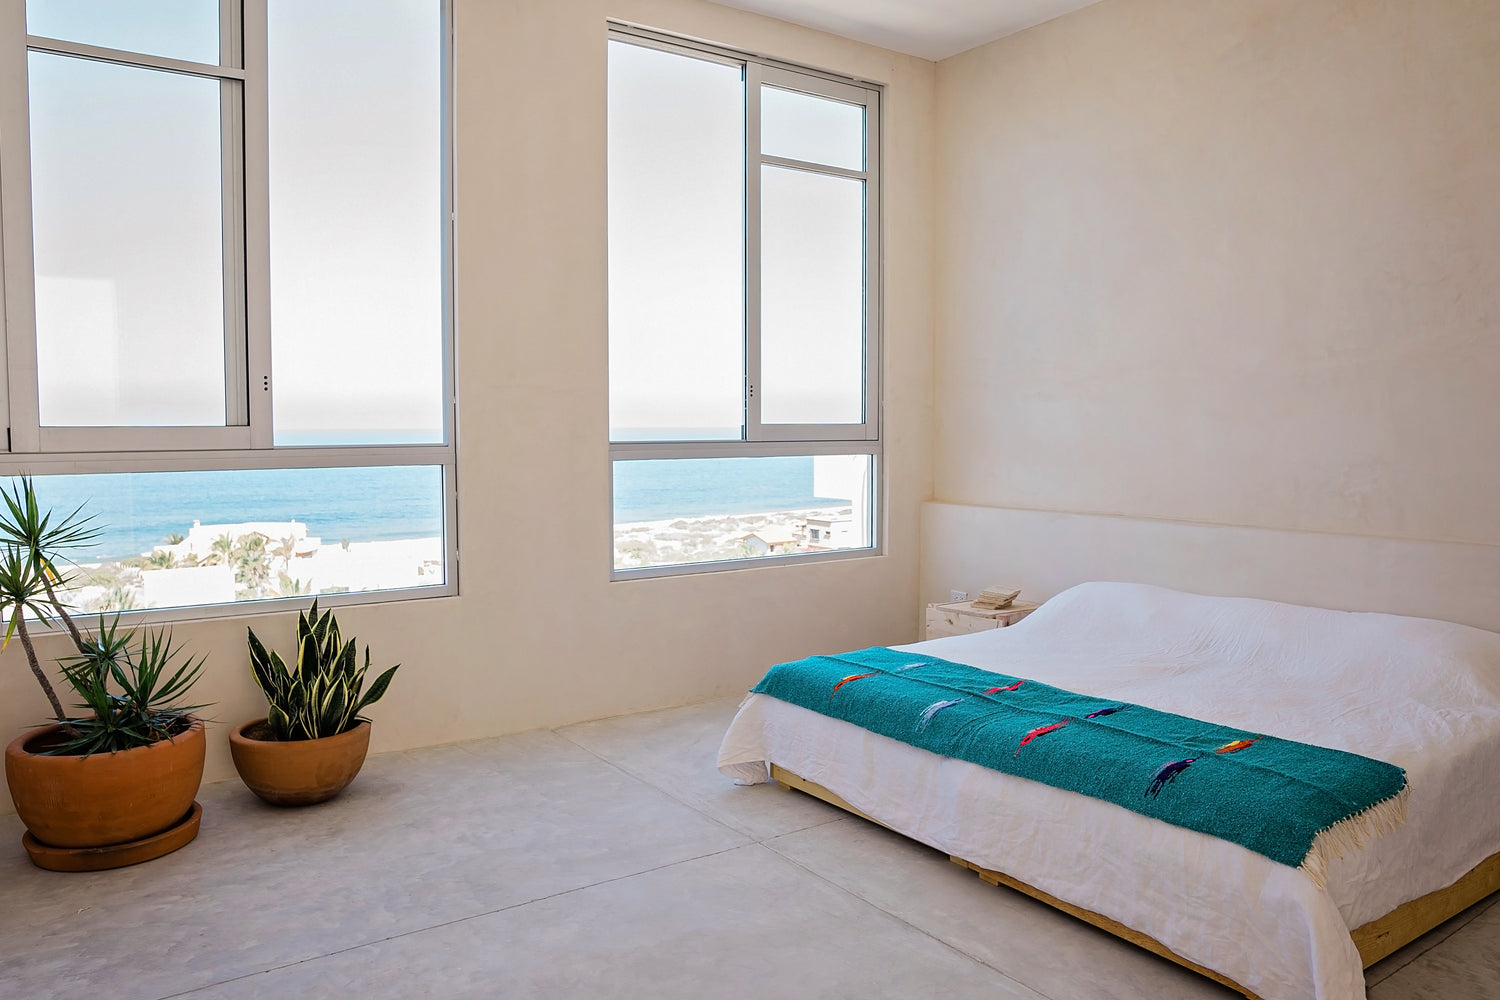 Image of bedroom accommodations for the soulside spring renewal and recovery yoga retreat in baja california, mexico